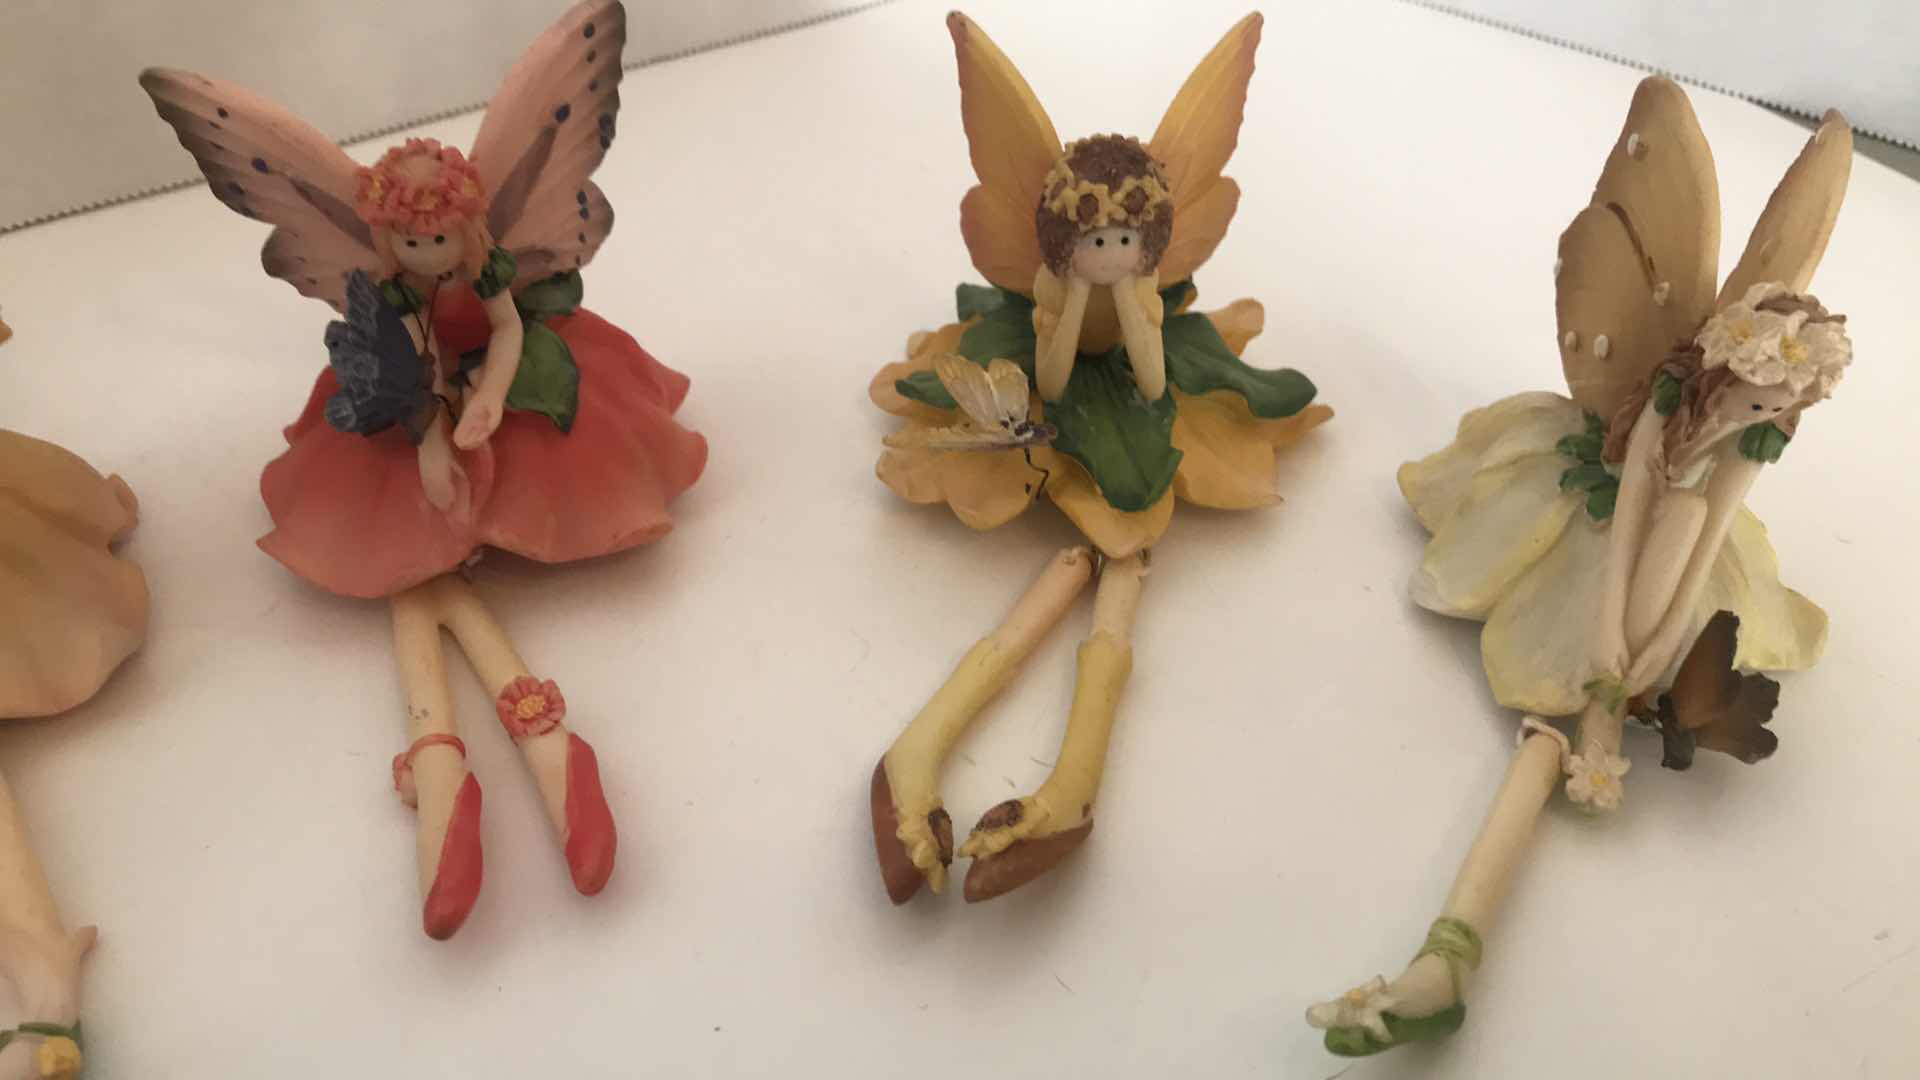 Photo 3 of COLLECTION OF SIX CERAMIC FAIRIES WITH DANGLING LEGS, APPROX 4” SITTING